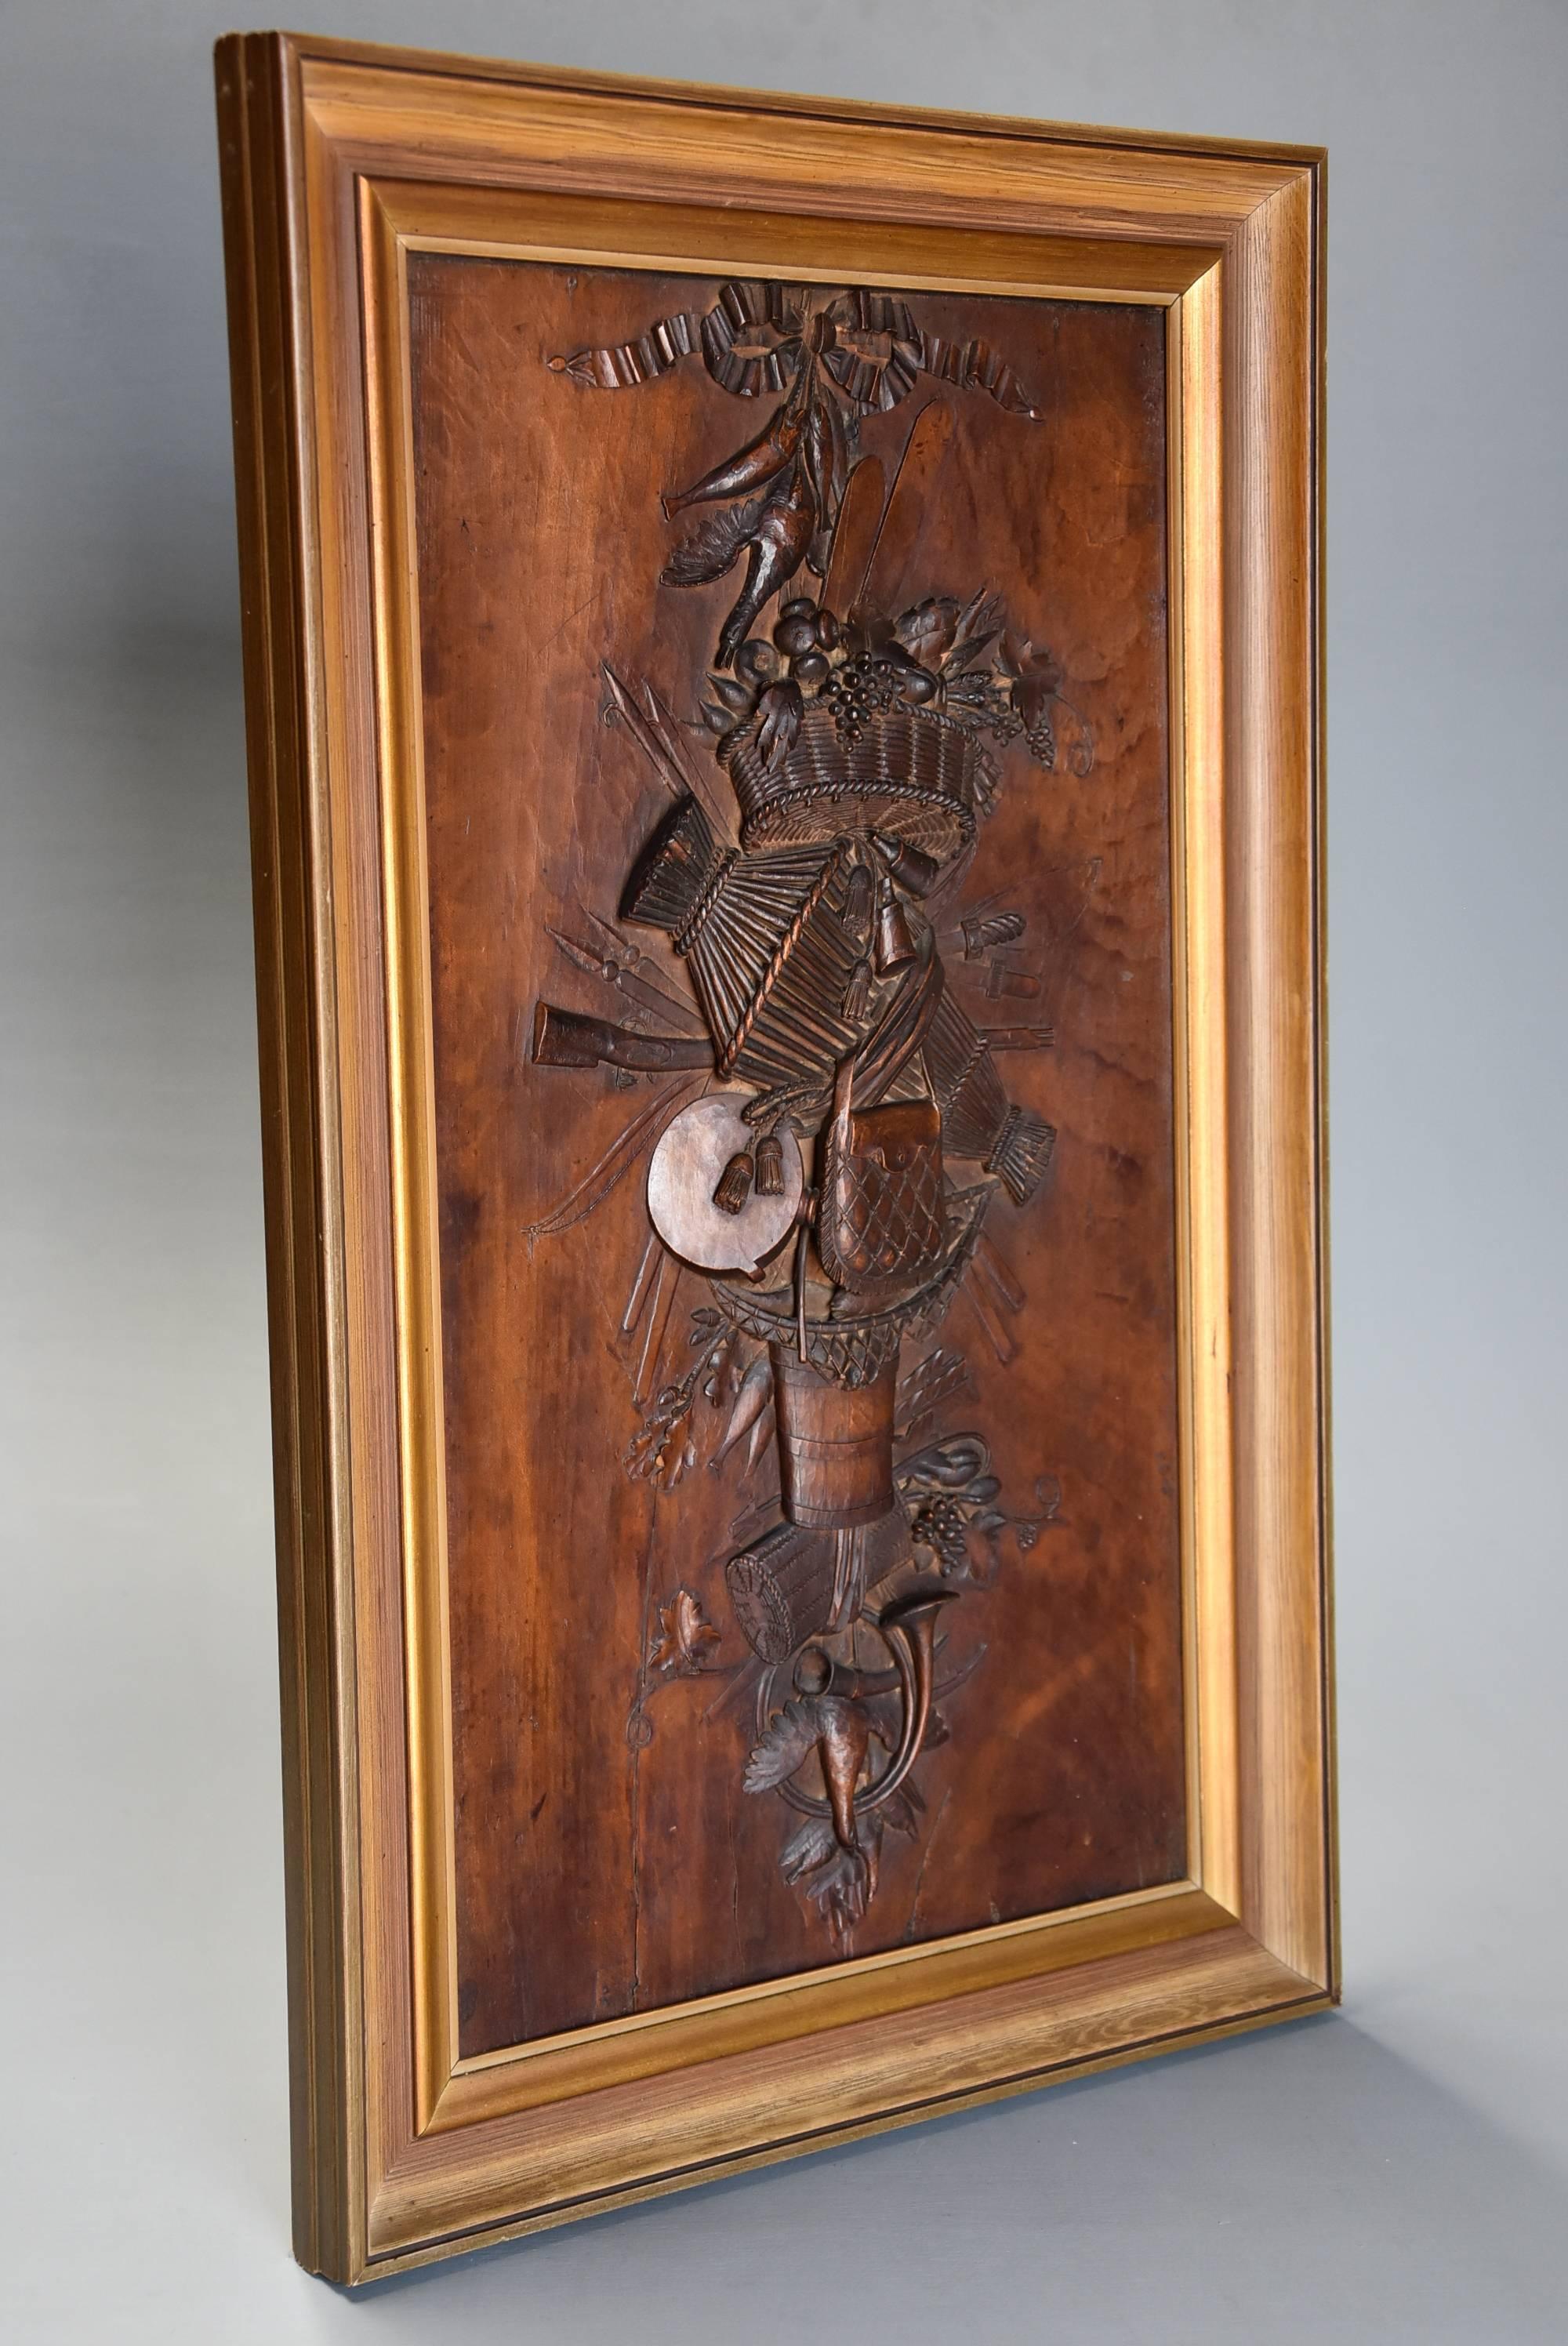 An exhibition quality finely carved mid-19th century Continental fruitwood trophy carving presented in a frame.

This superbly carved panel consists of various 'trophy' and hunting related articles such as a carved ribbon, fish, birds, finely